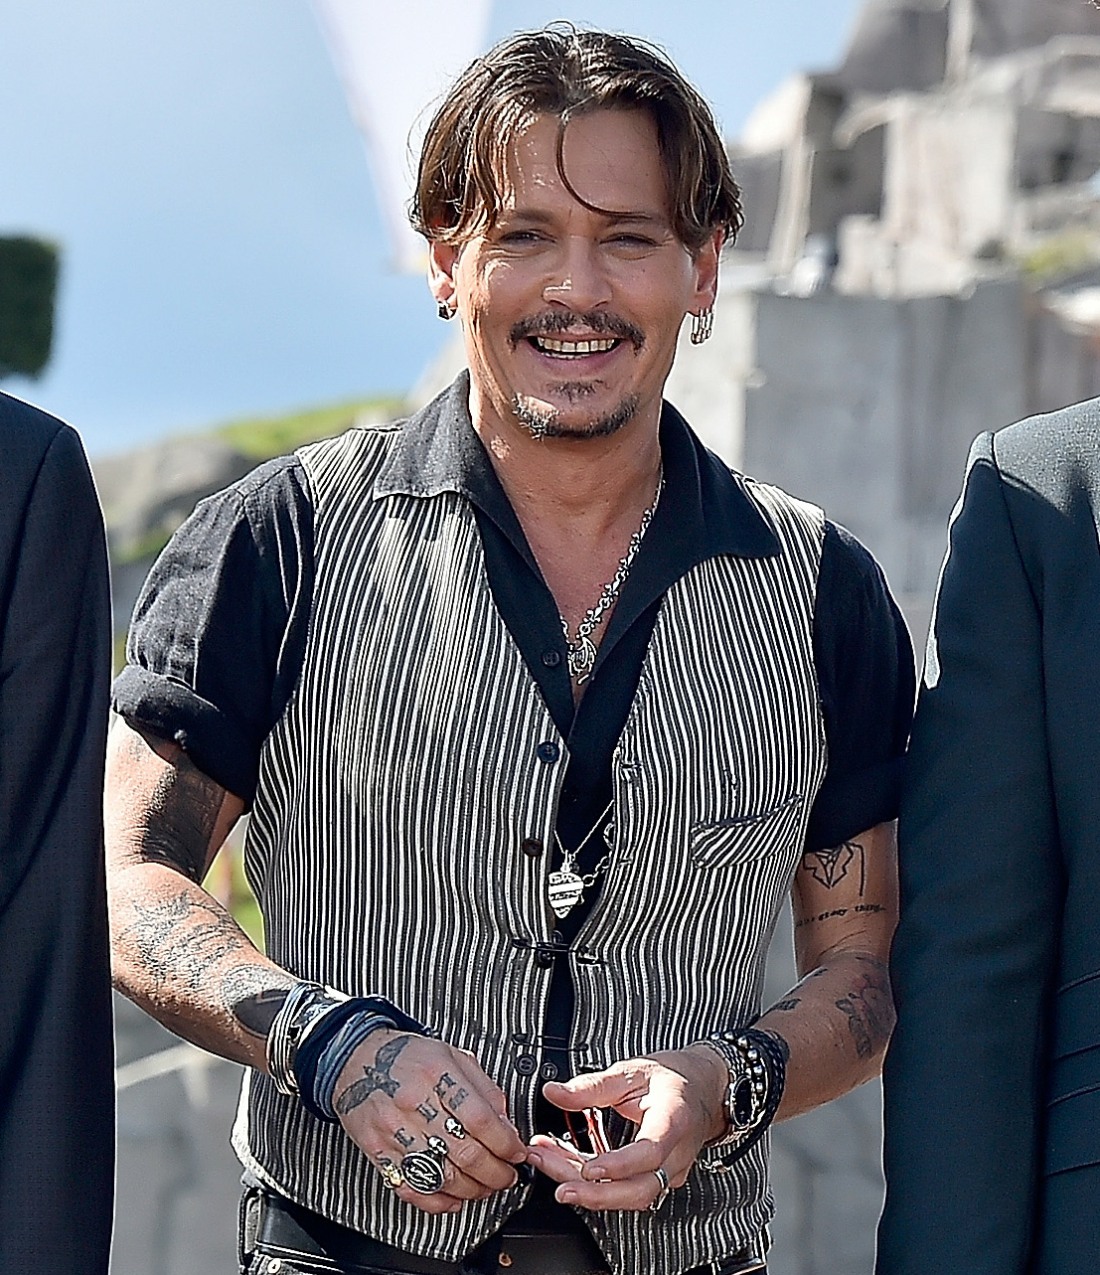 Johnny Depp And The Cast Of 'Pirates Of The Caribbean: Salazar’s Revenge' Sail Into Disneyland Paris To Surprise Fans